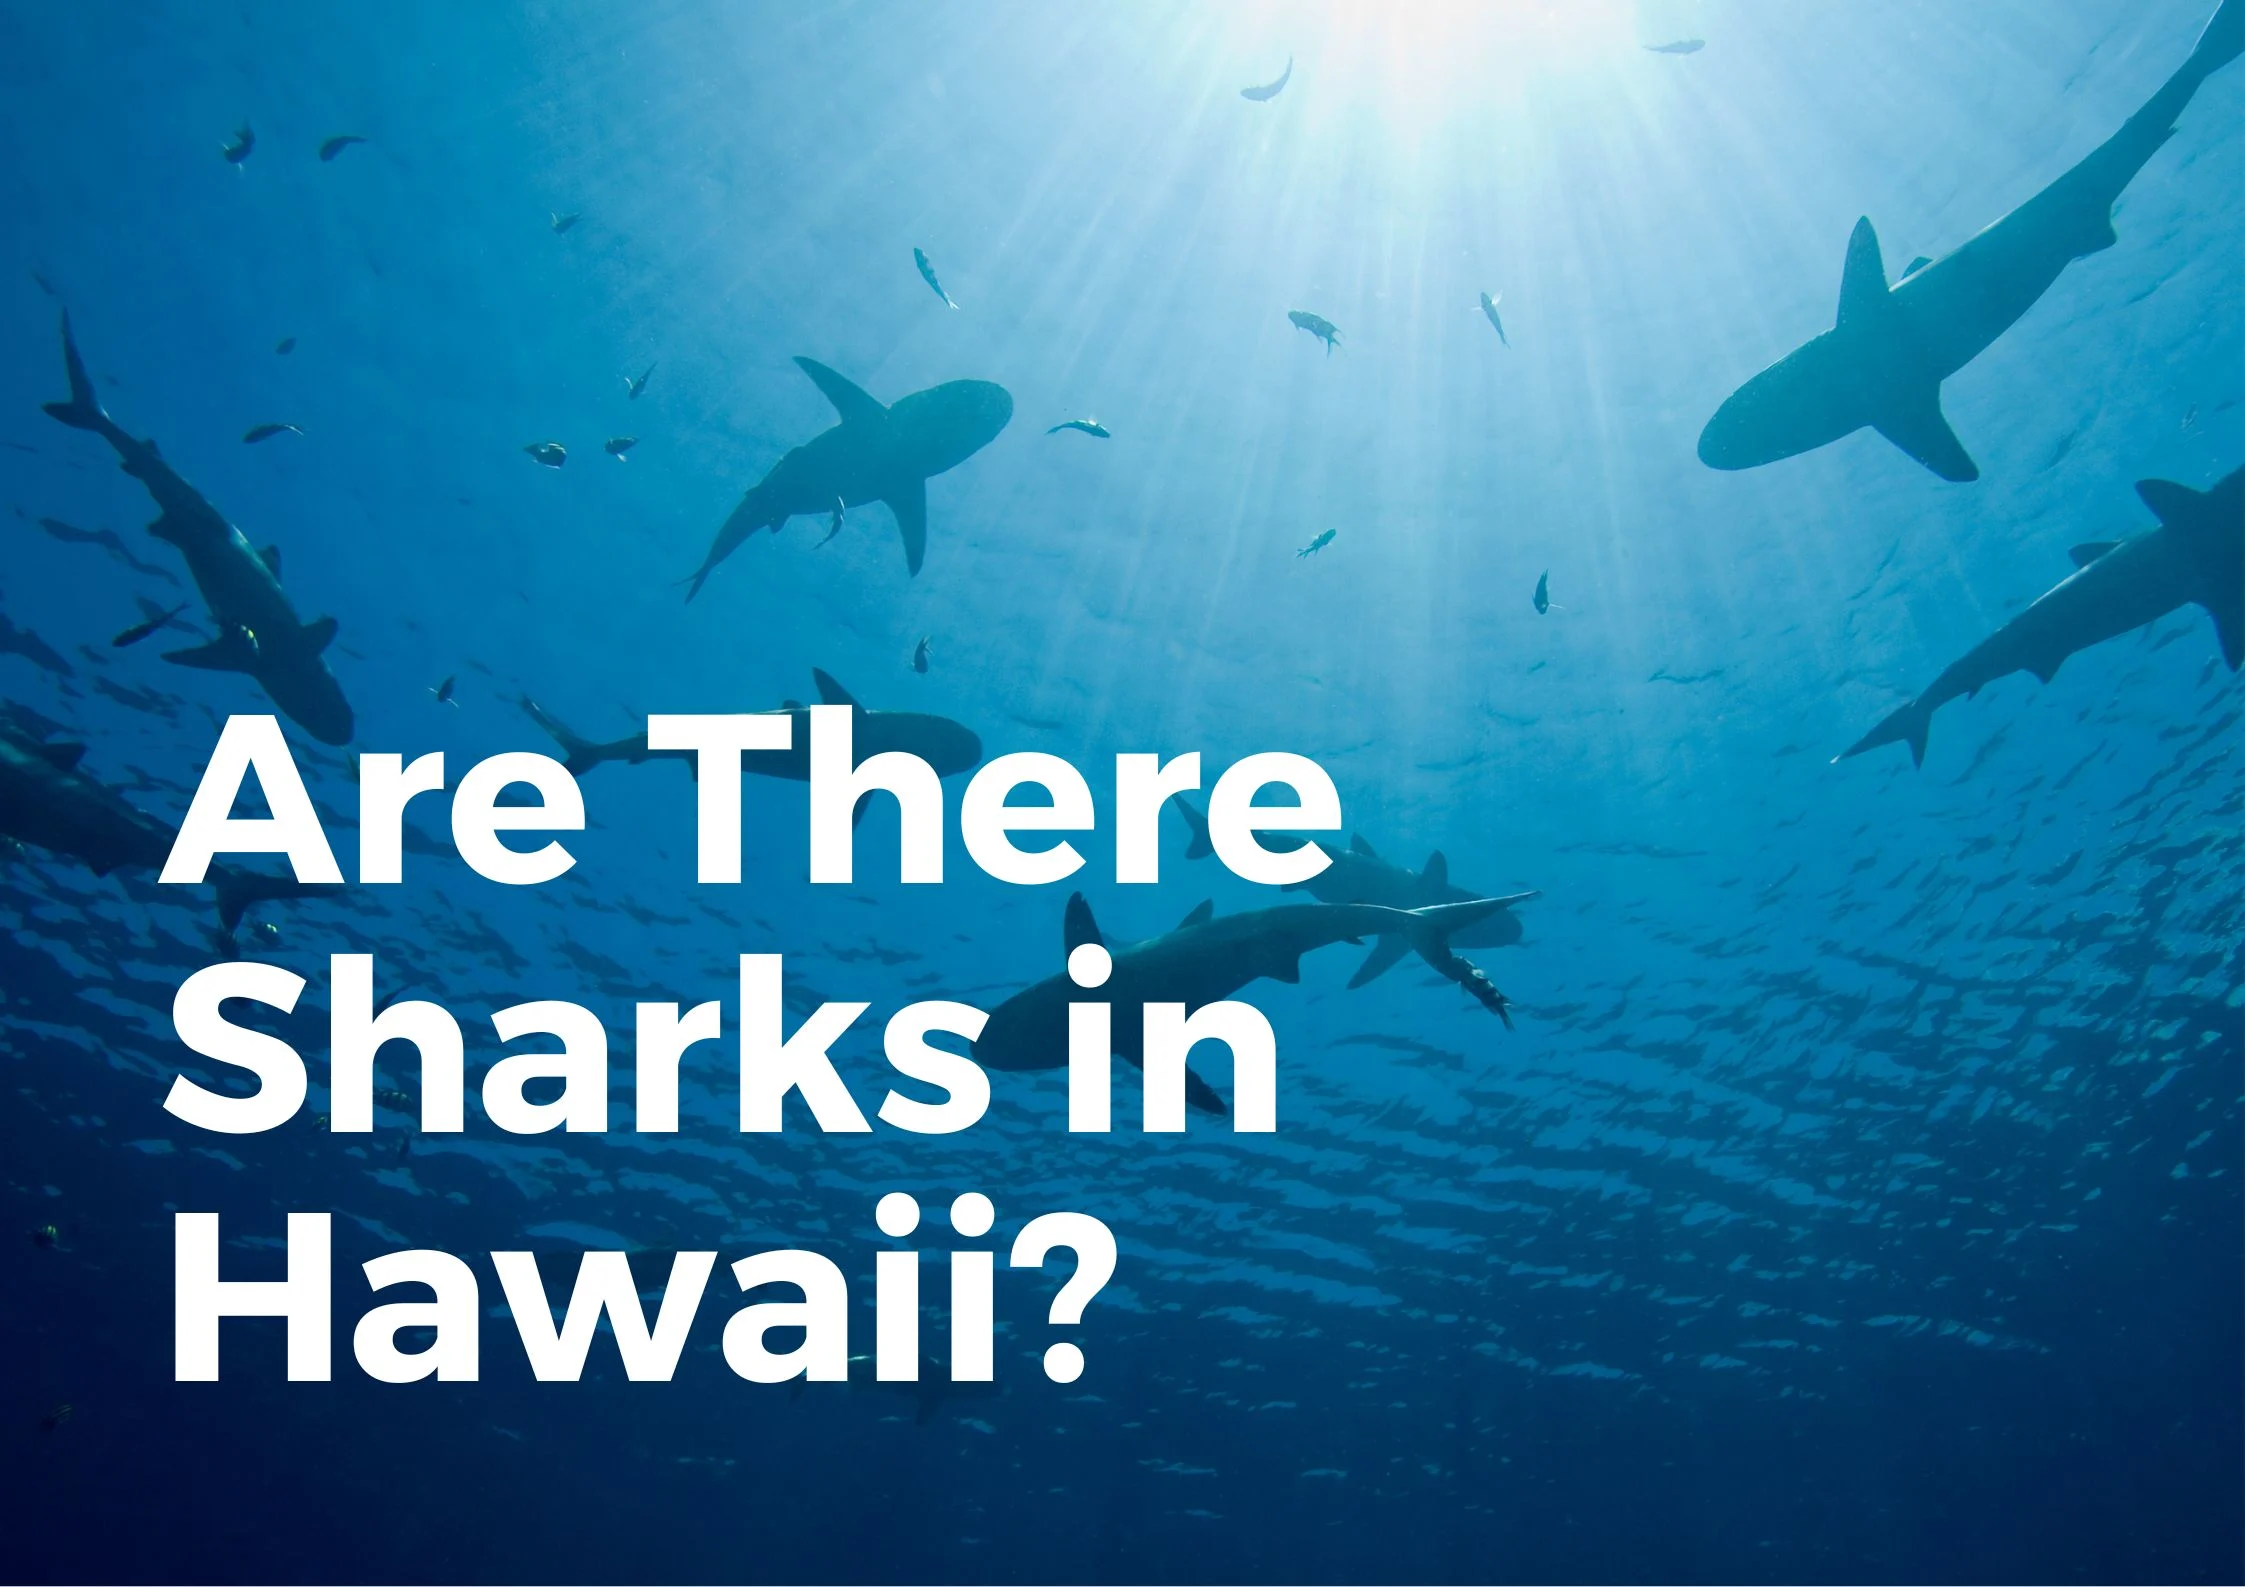 Are there sharks in hawaii